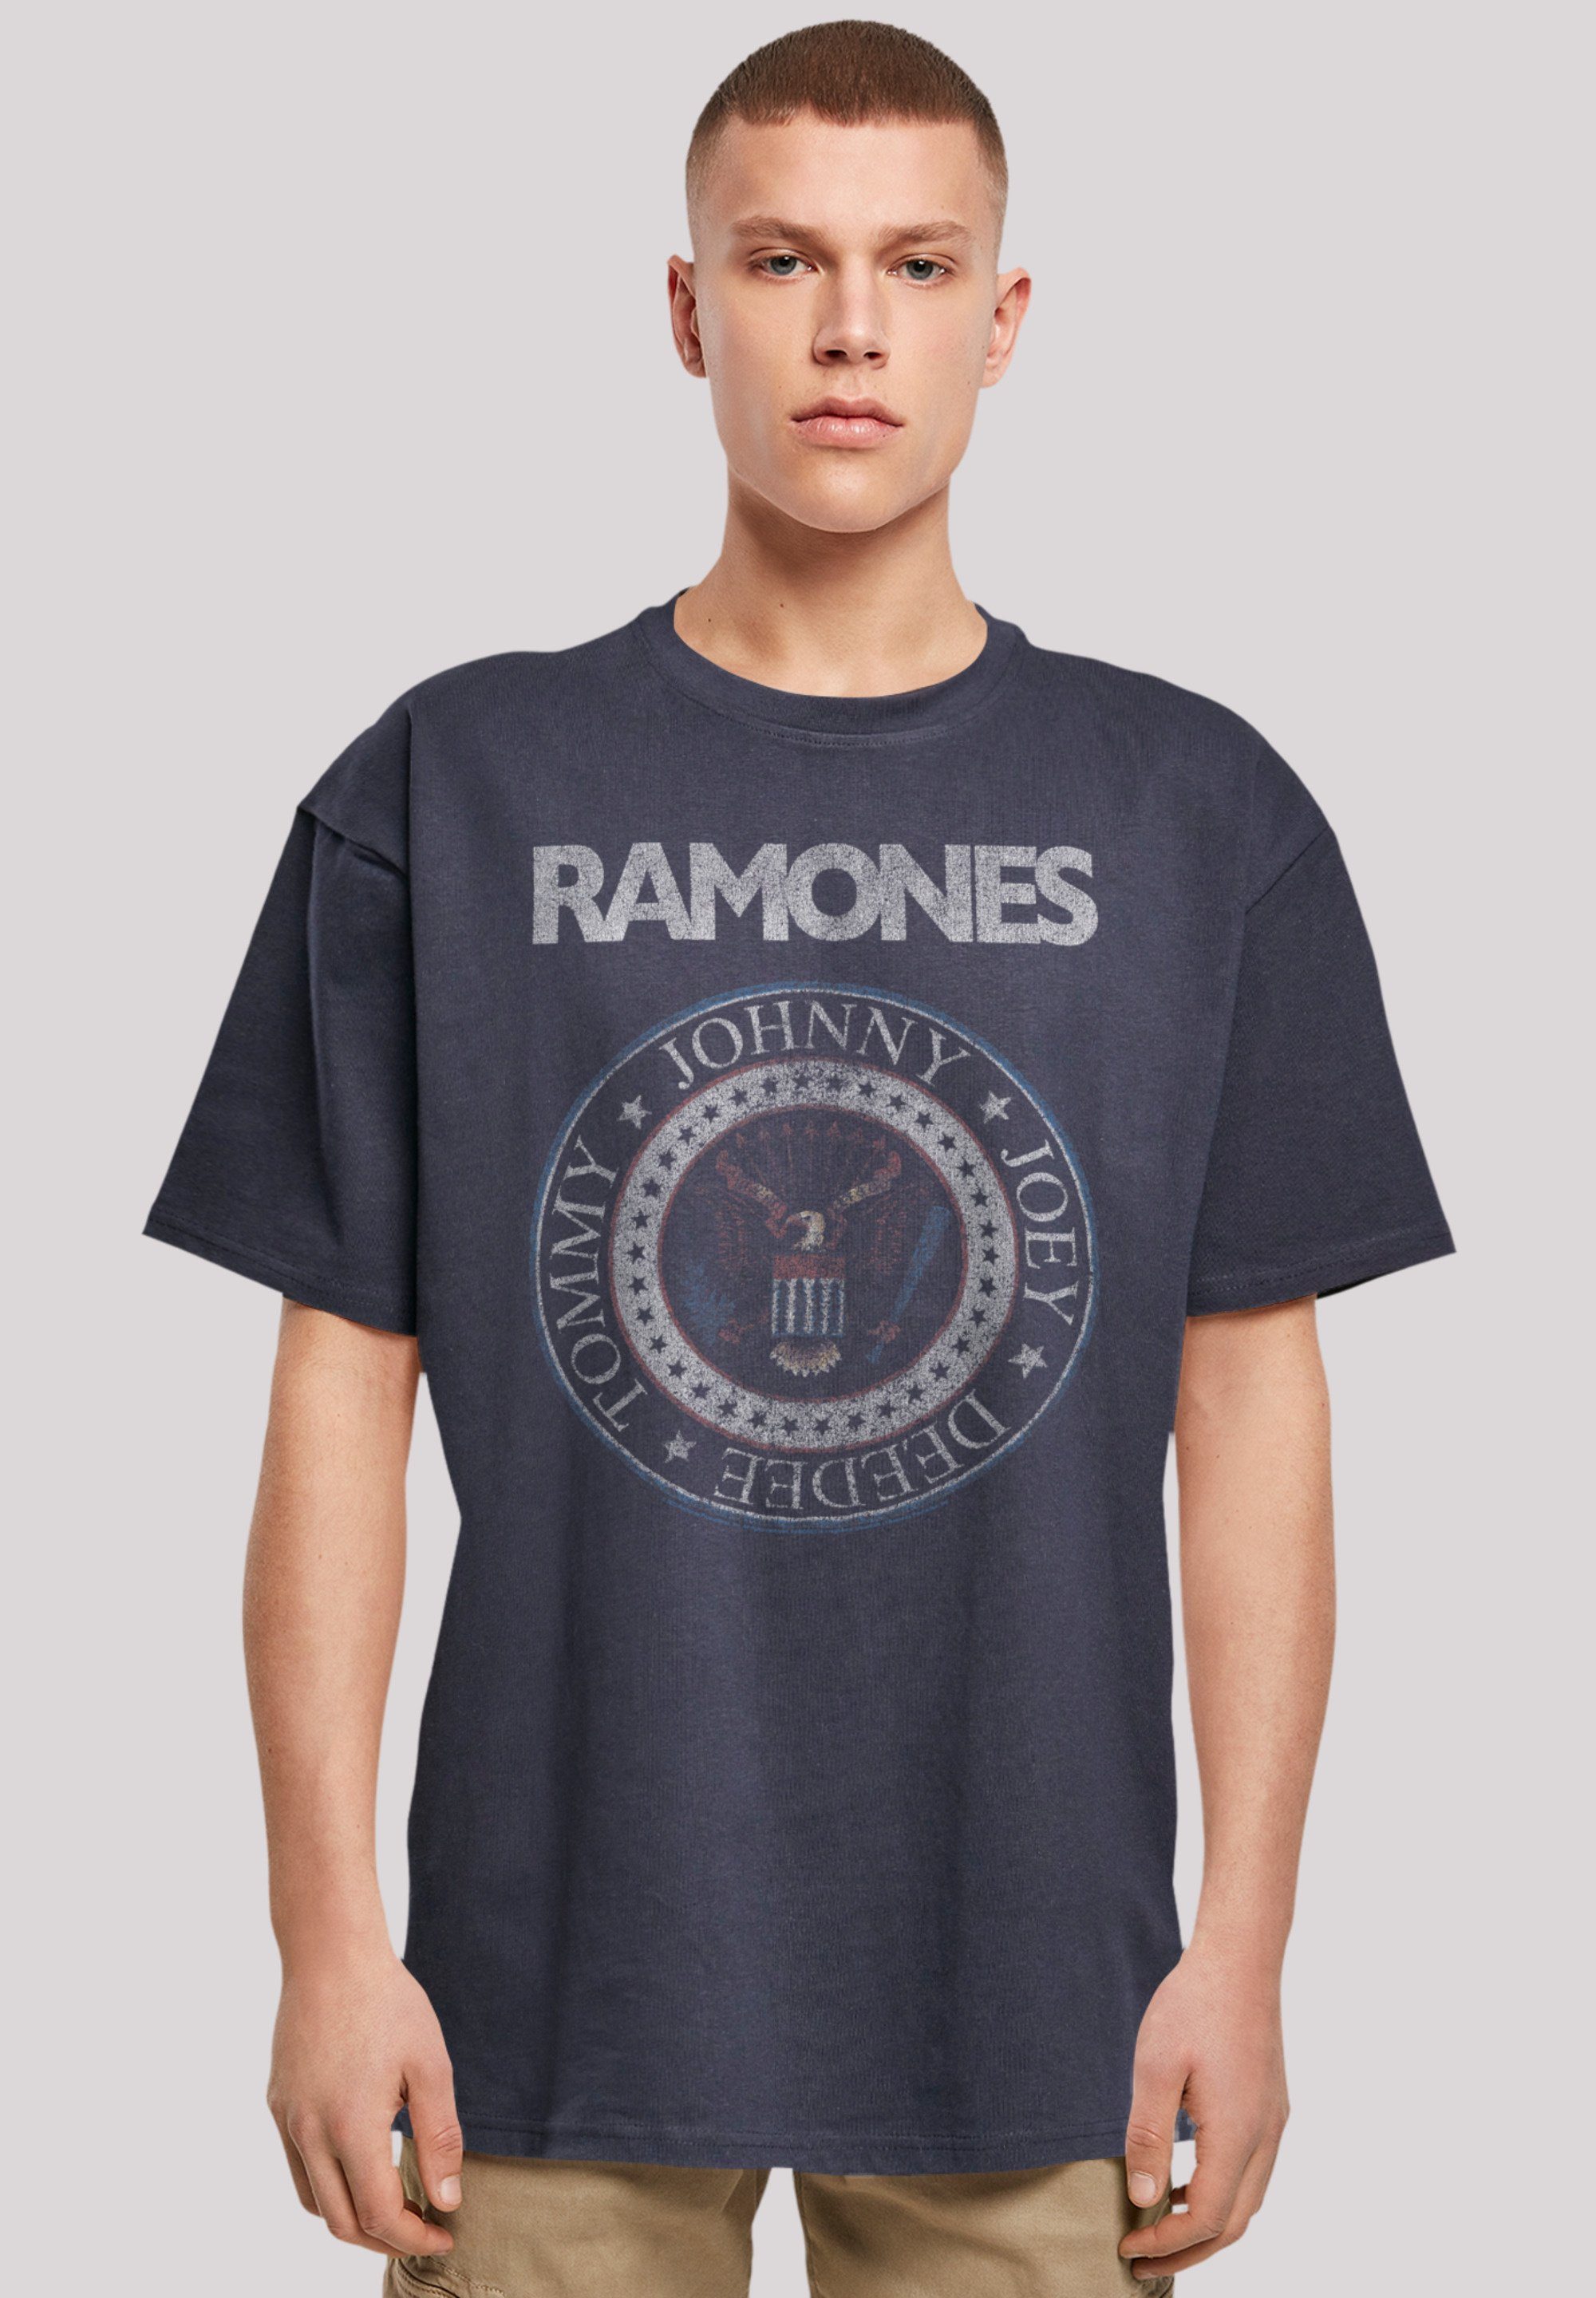 Red navy Ramones Qualität, White F4NT4STIC Musik Rock-Musik Seal Band, T-Shirt Band Rock Premium And